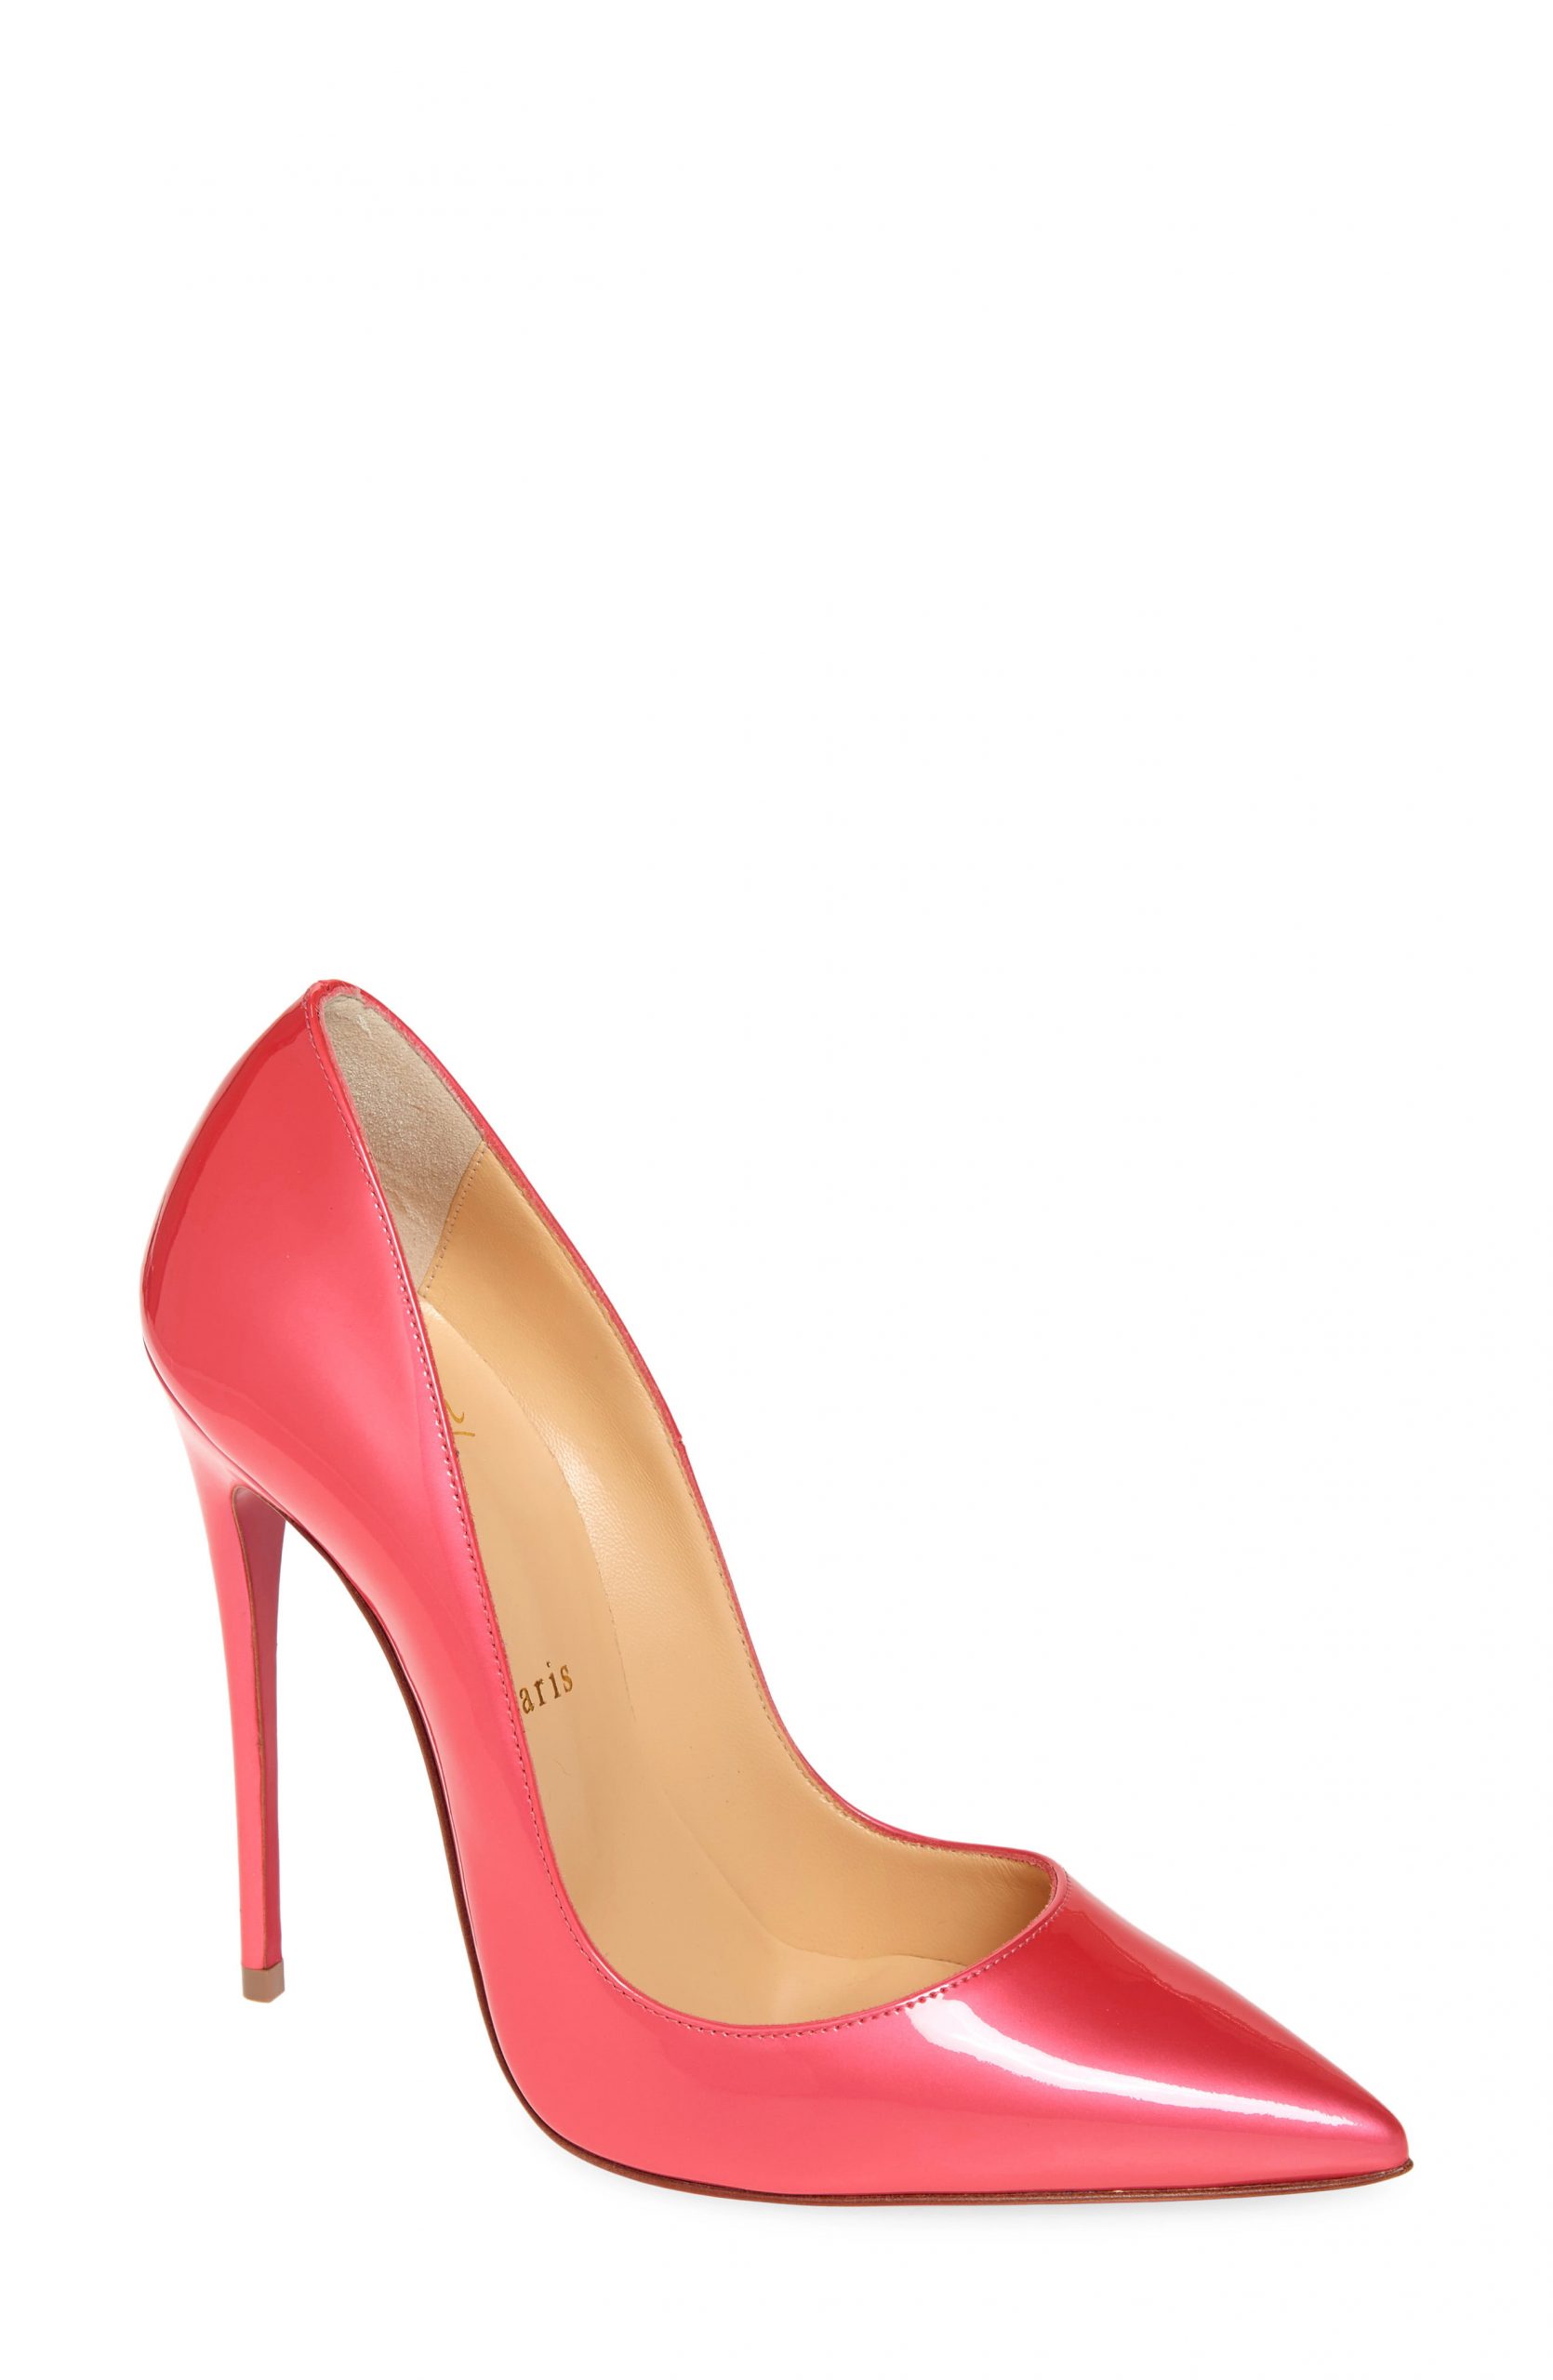 Women’s Christian Louboutin So Kate Pointy Toe Pump, Size 5.5US - Pink ...